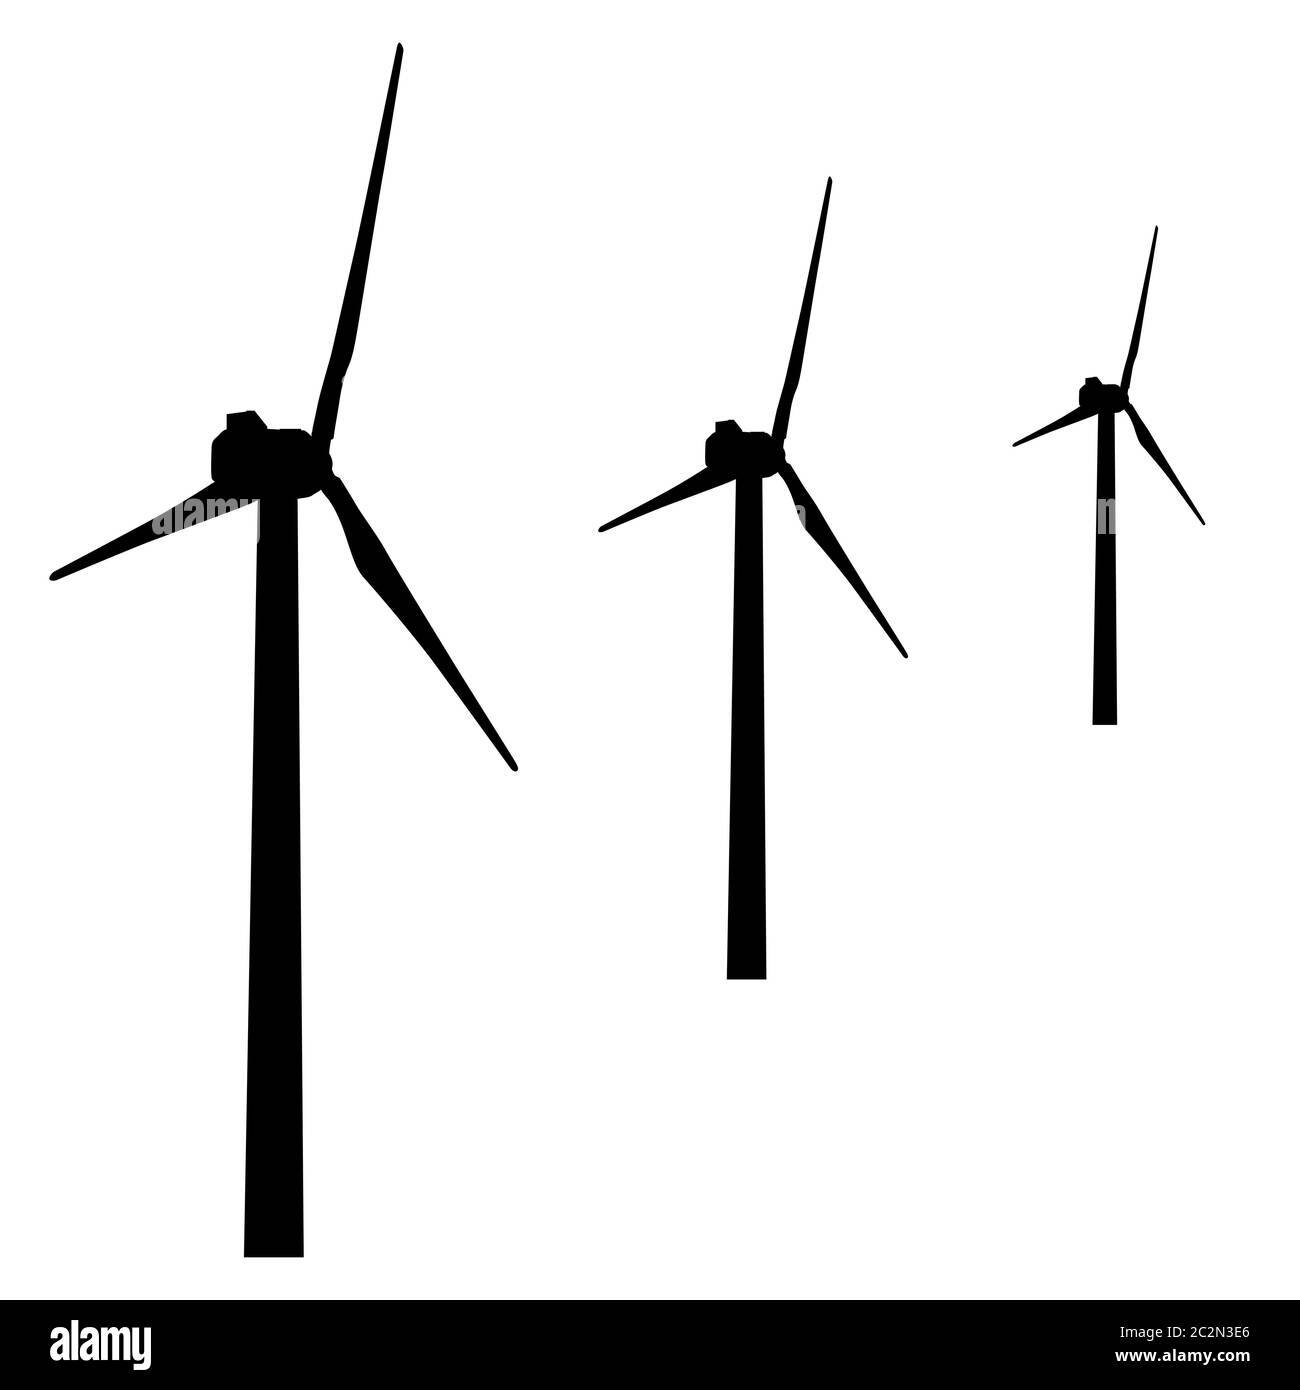 windmills for electric power production.  vector illustration Stock Photo